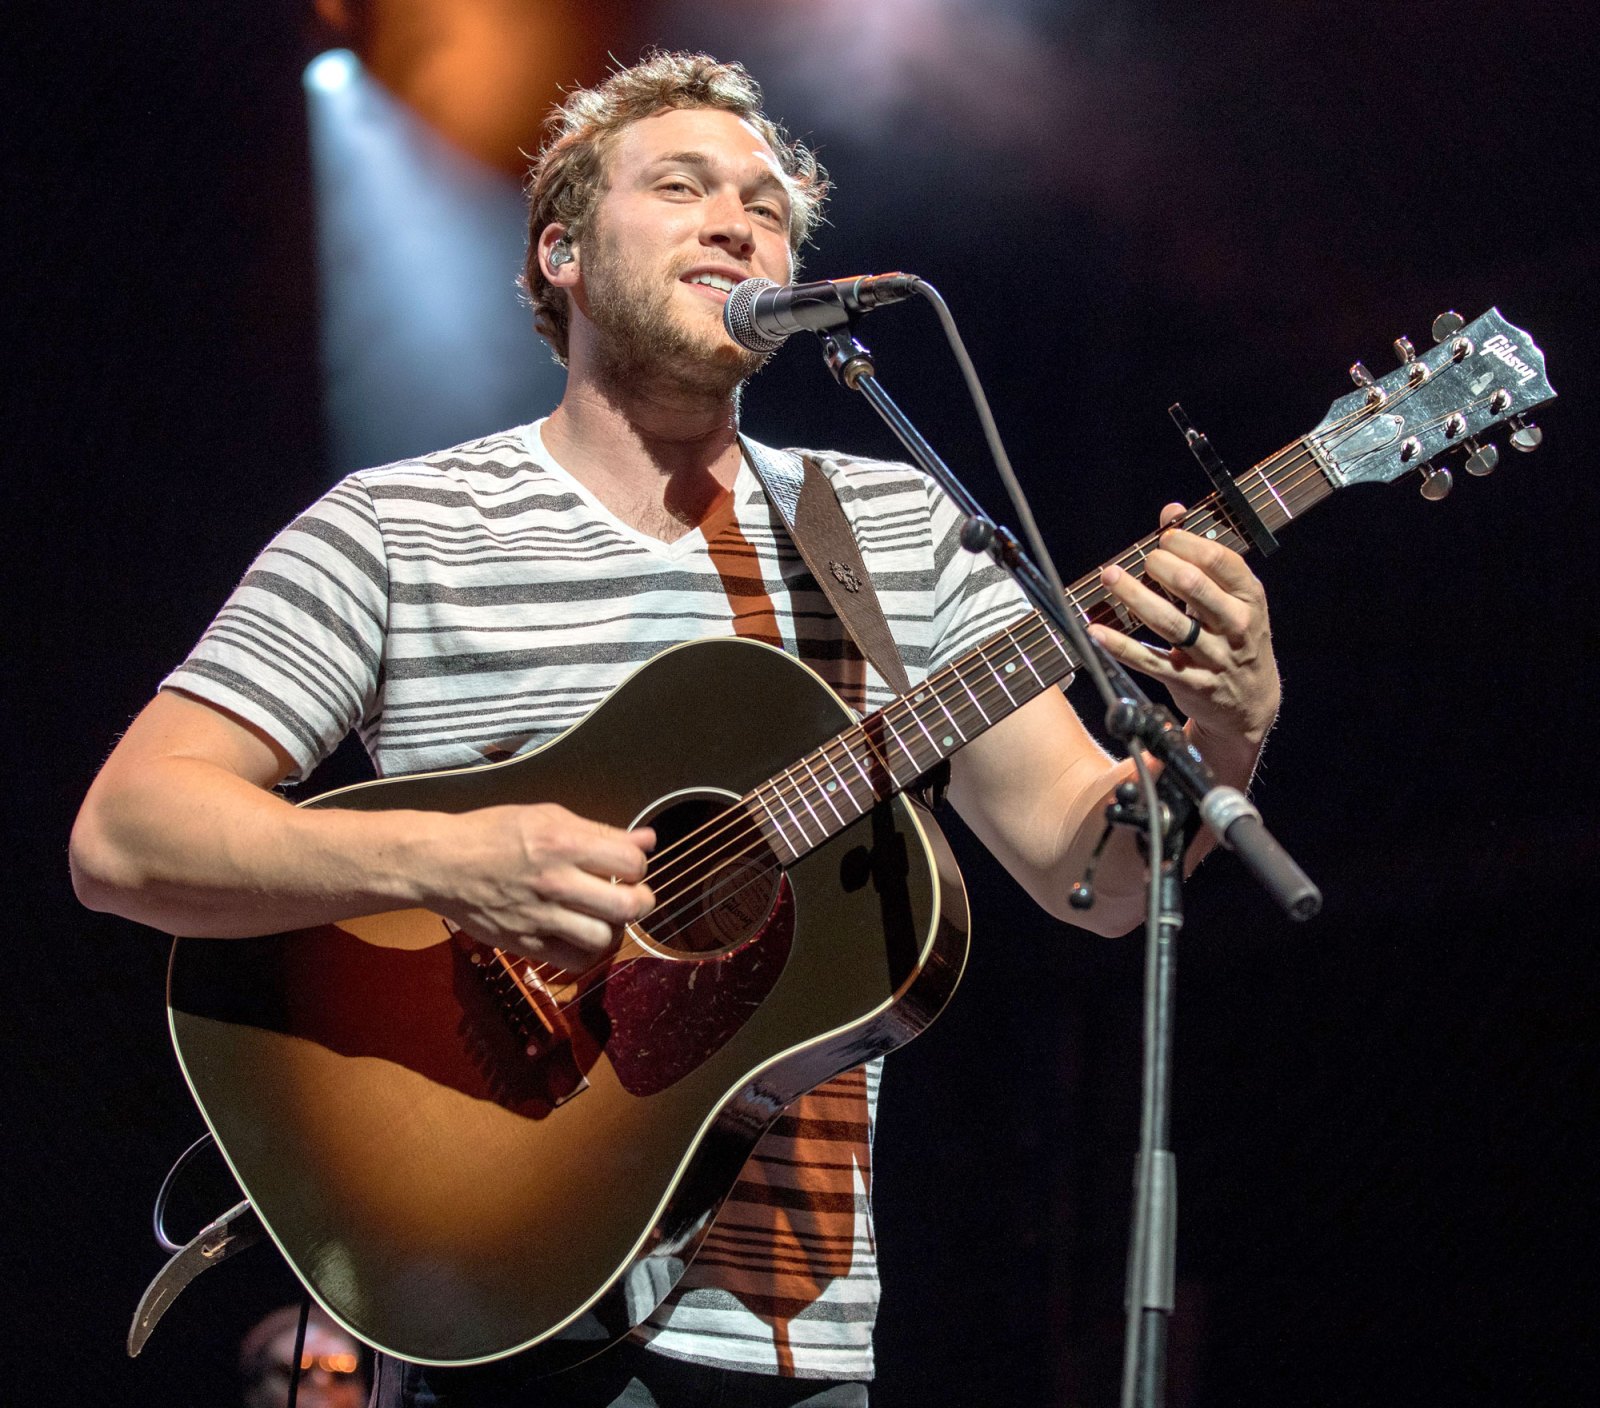 Phillip Phillips Wants Out Biggest American Idol Scandals Controversies Through Years